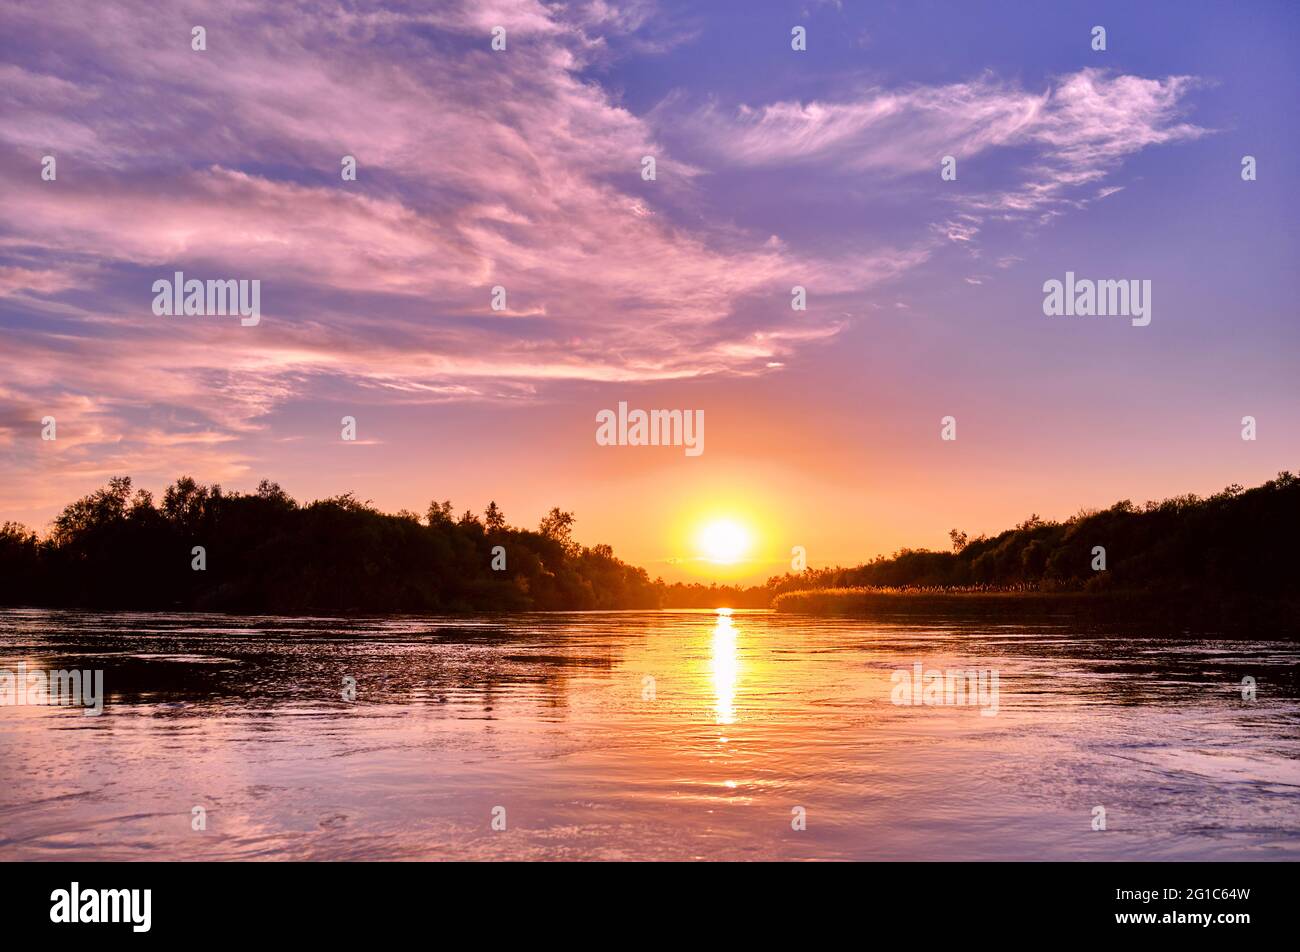 Magic atmosphere of a romantic evening; golden sunset on the river Stock Photo